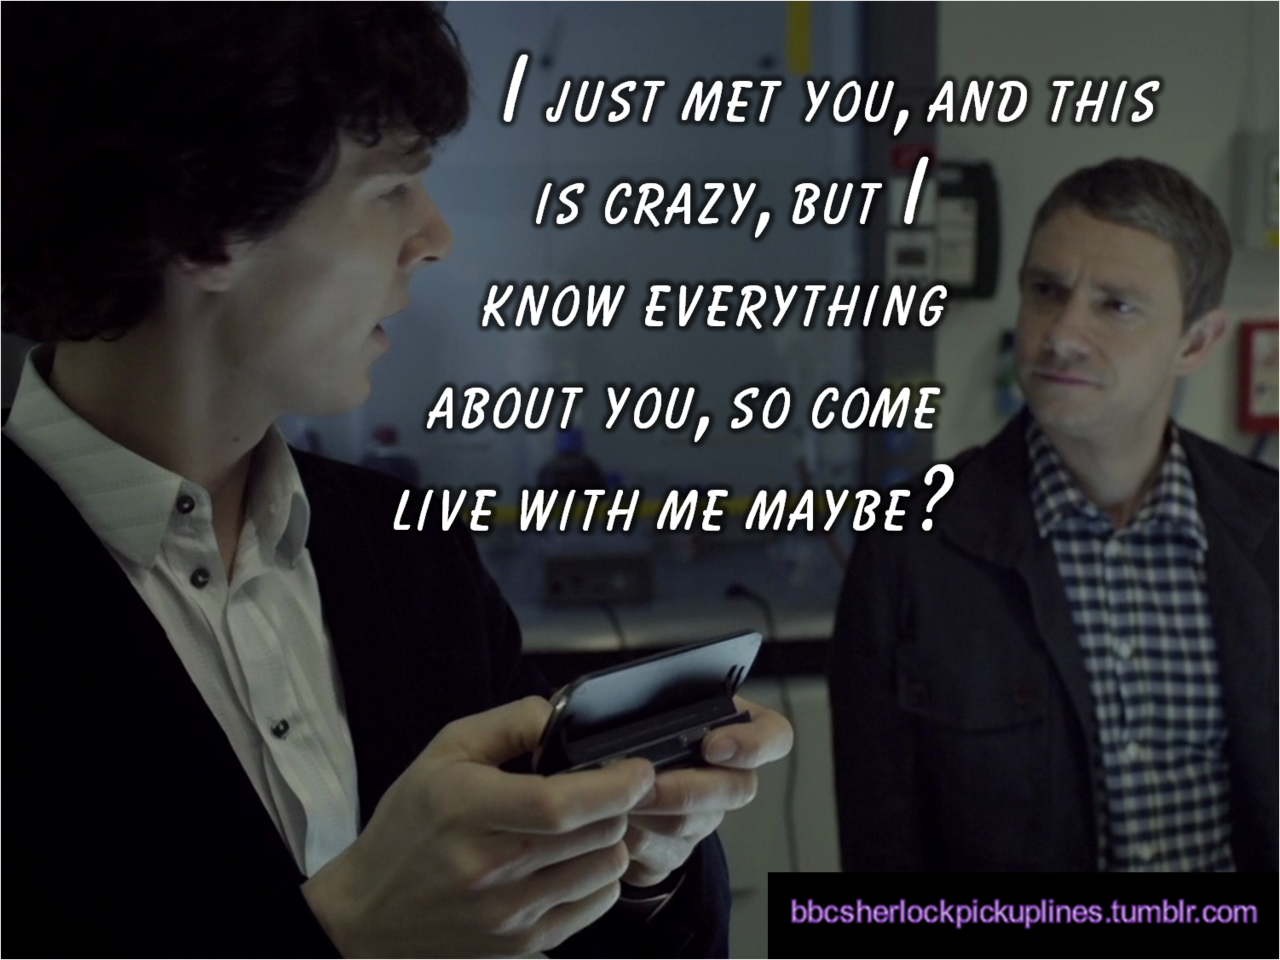 The best of series one references, from BBC Sherlock pick-up lines.